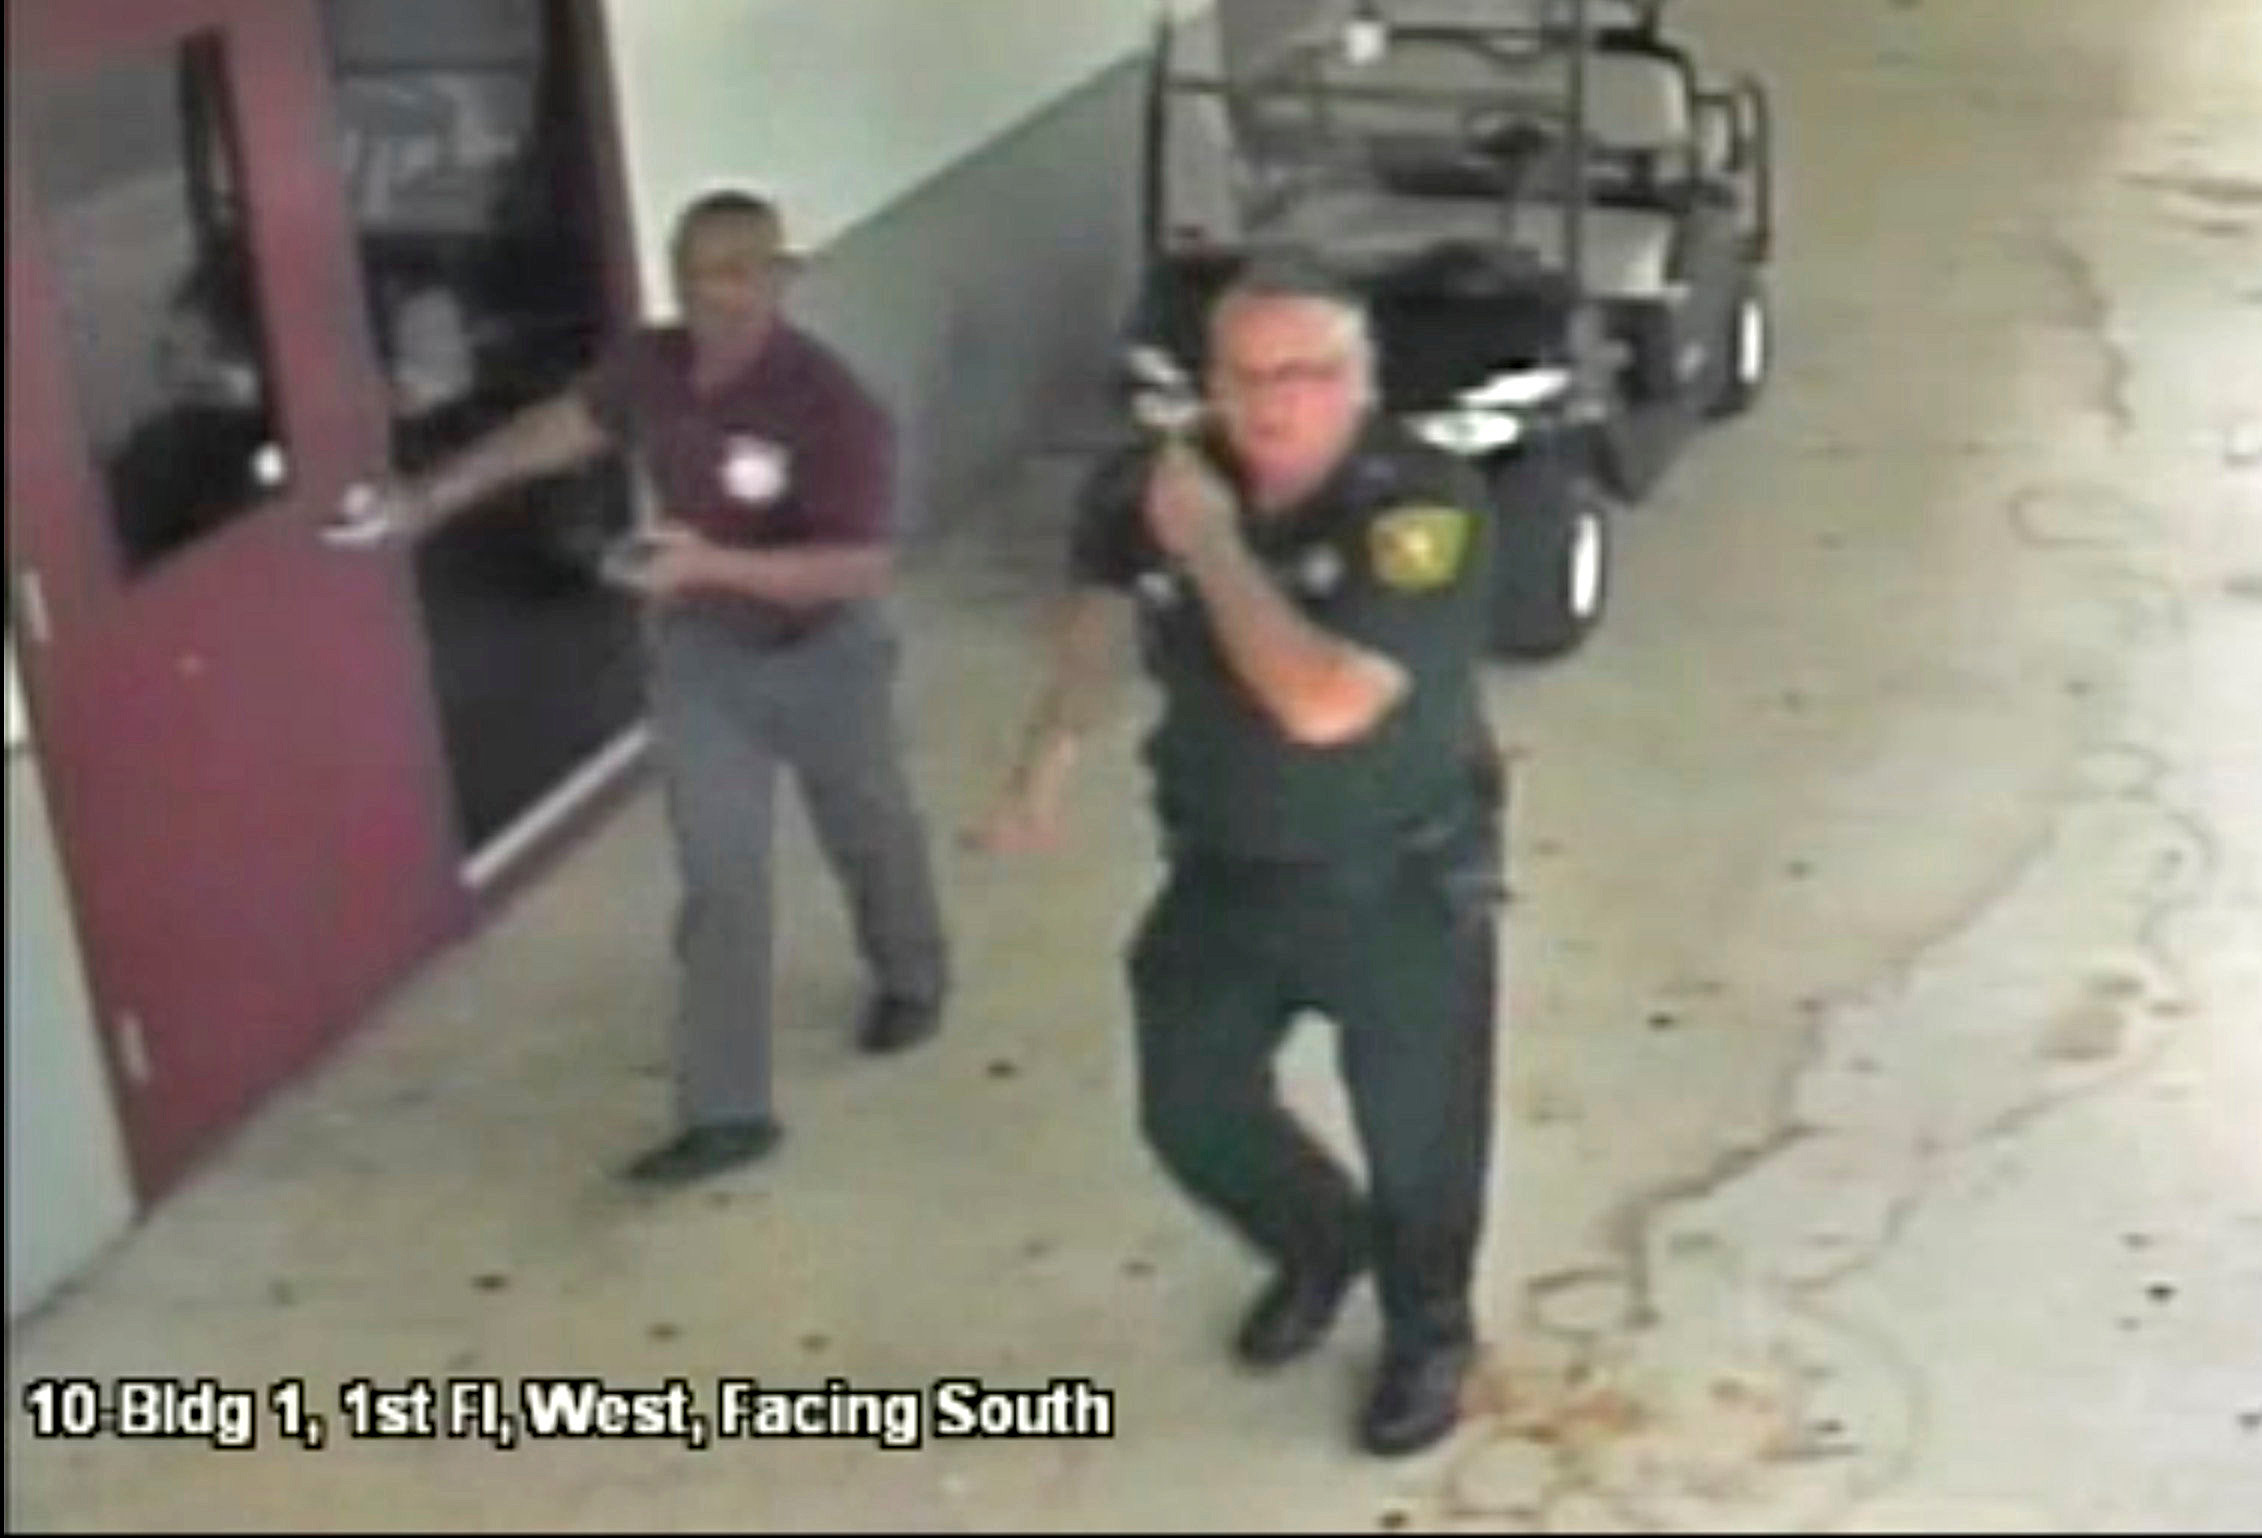 PHOTO: Then-Broward County Sheriff's Deputy Scot Peterson, assigned to Marjory Stoneman Douglas High School during the Feb. 14, 2018 shooting, is seen in an image captured from the school surveillance video released by Broward County Sheriff's Office.